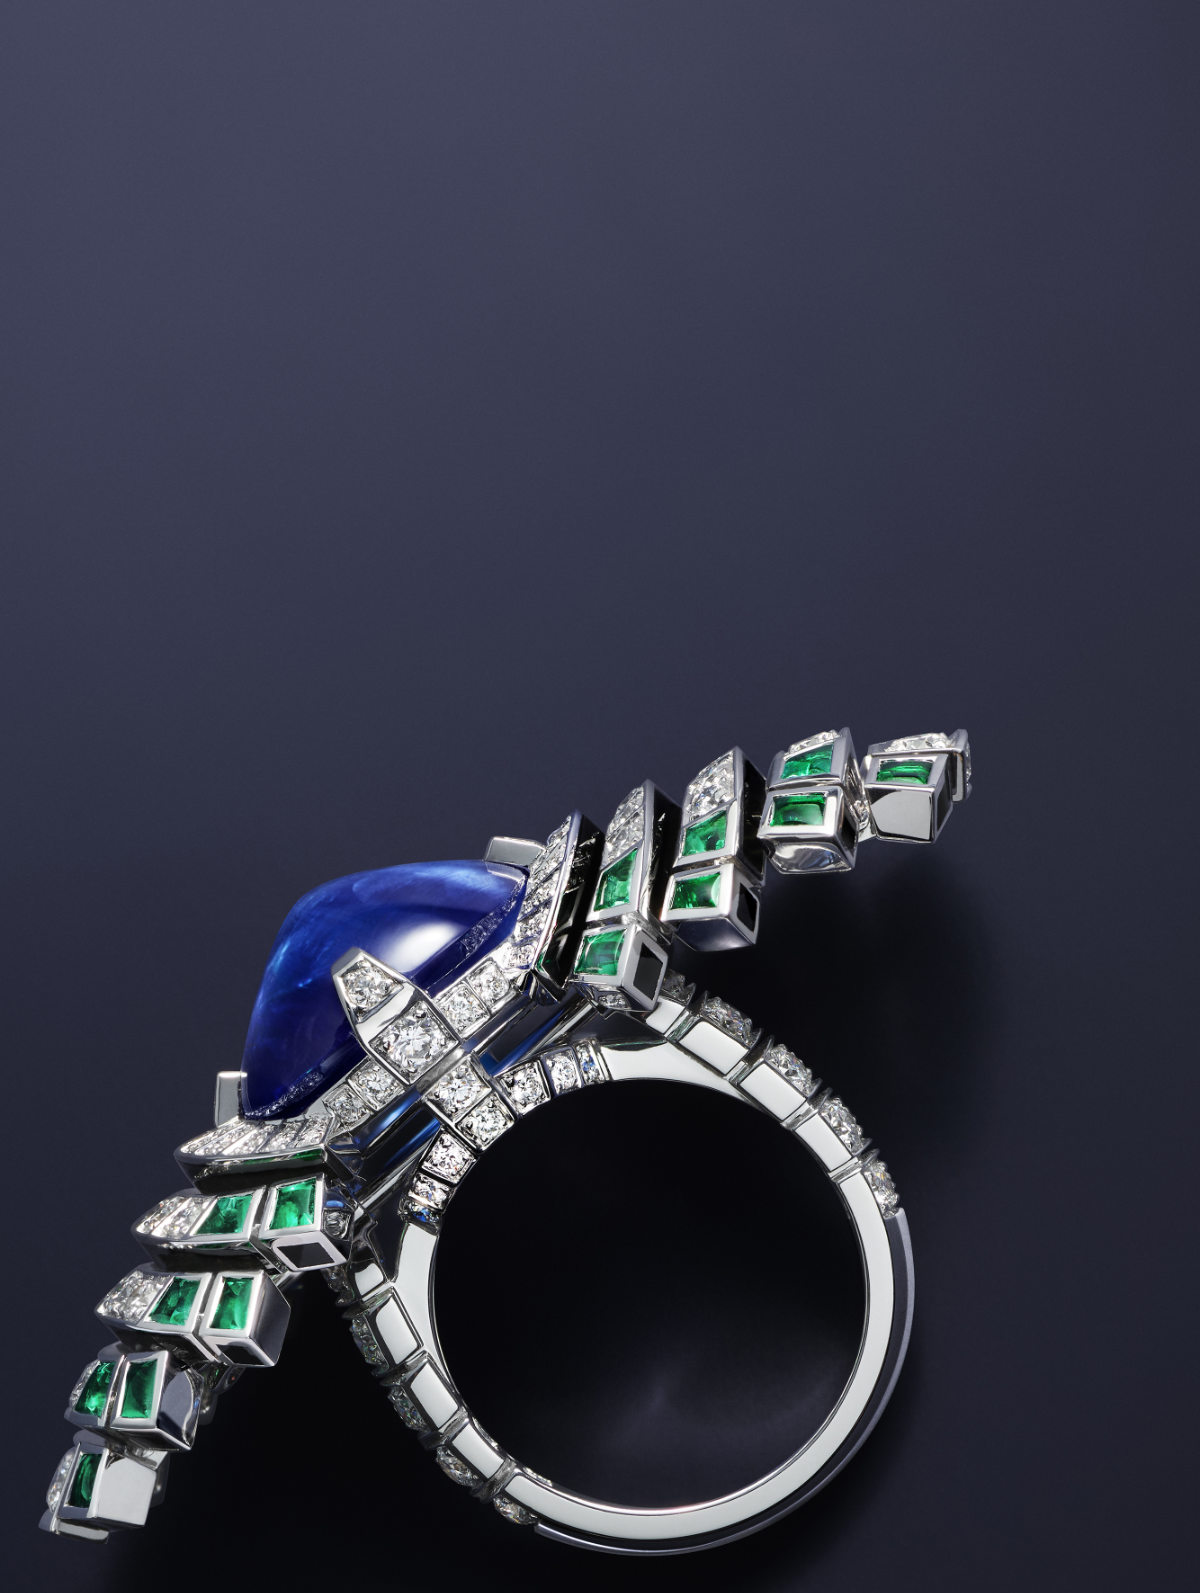 The rings in the Sixième Sens par Cartier High Jewellery collection